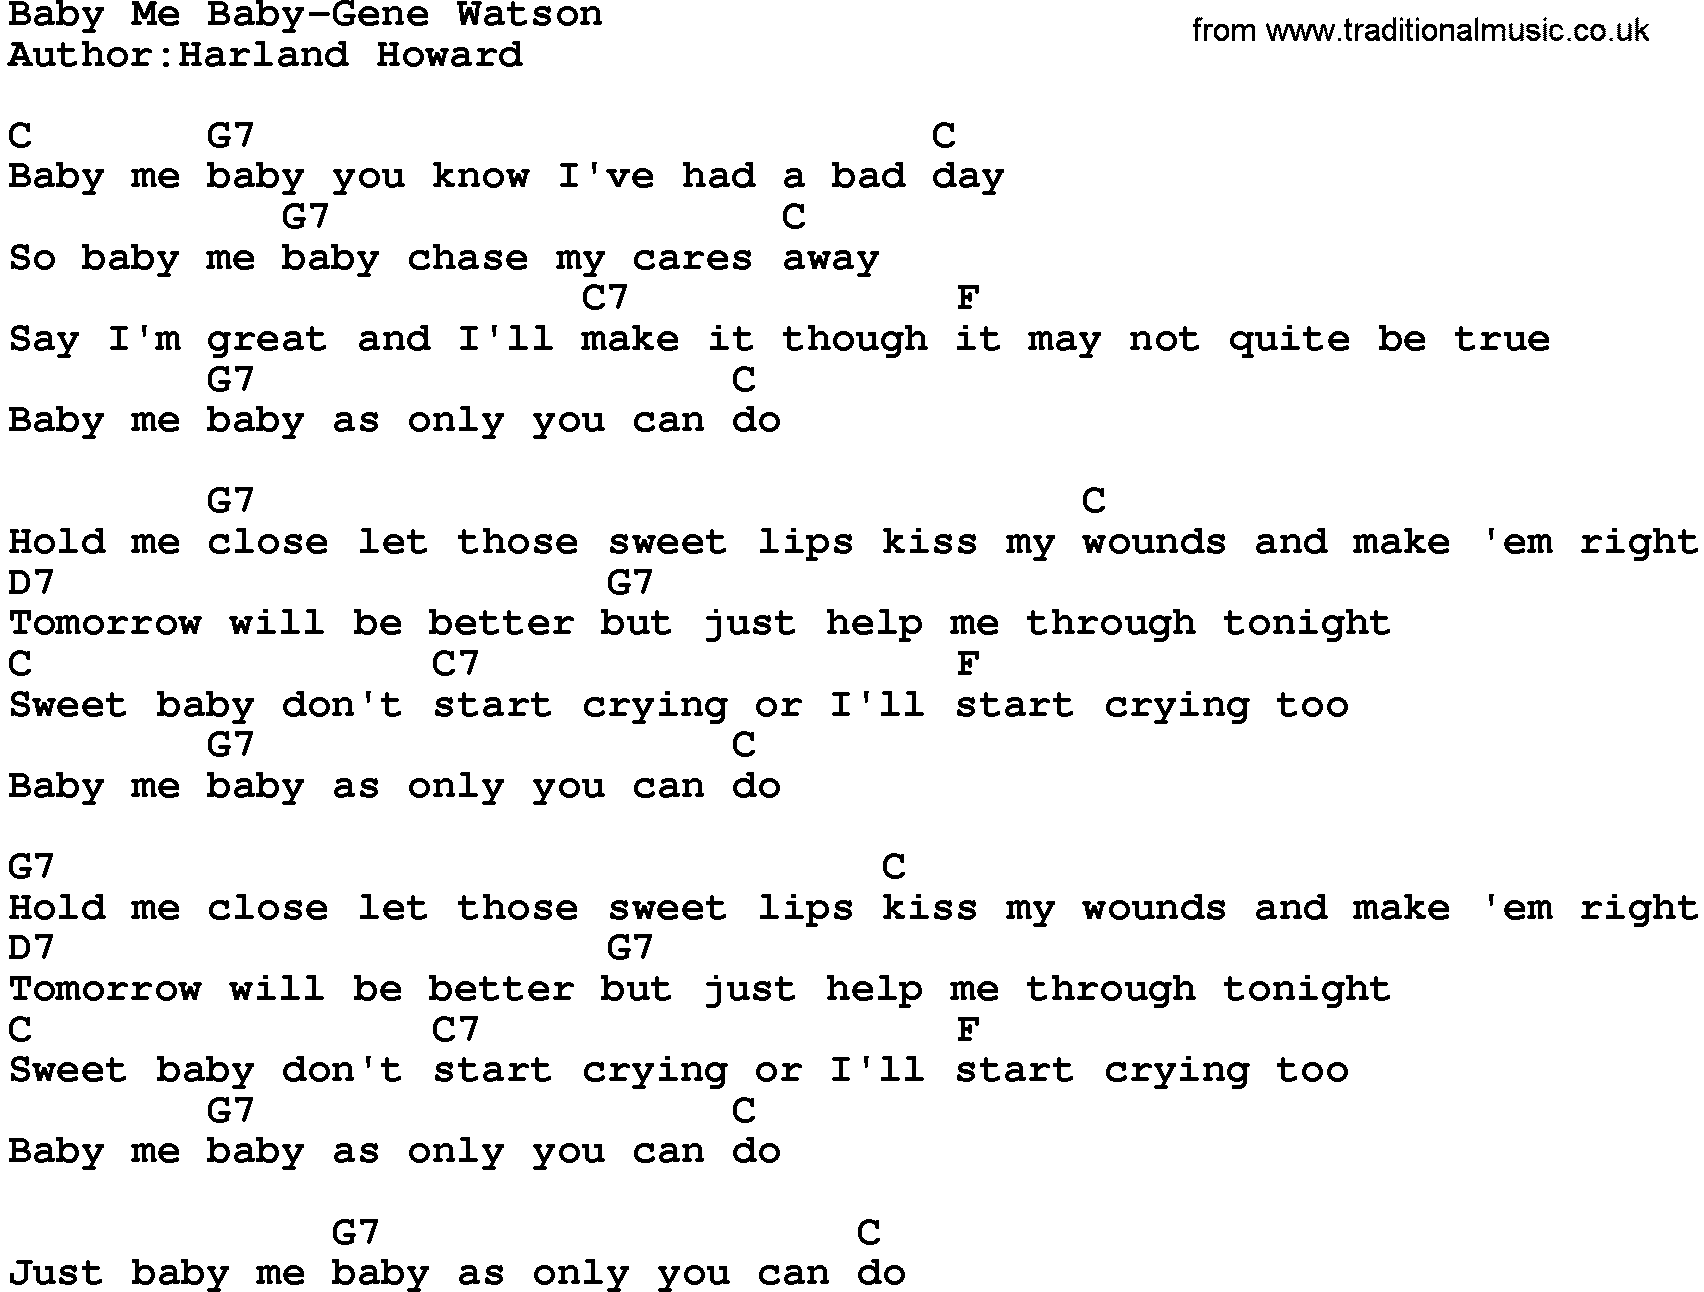 Country music song: Baby Me Baby-Gene Watson lyrics and chords